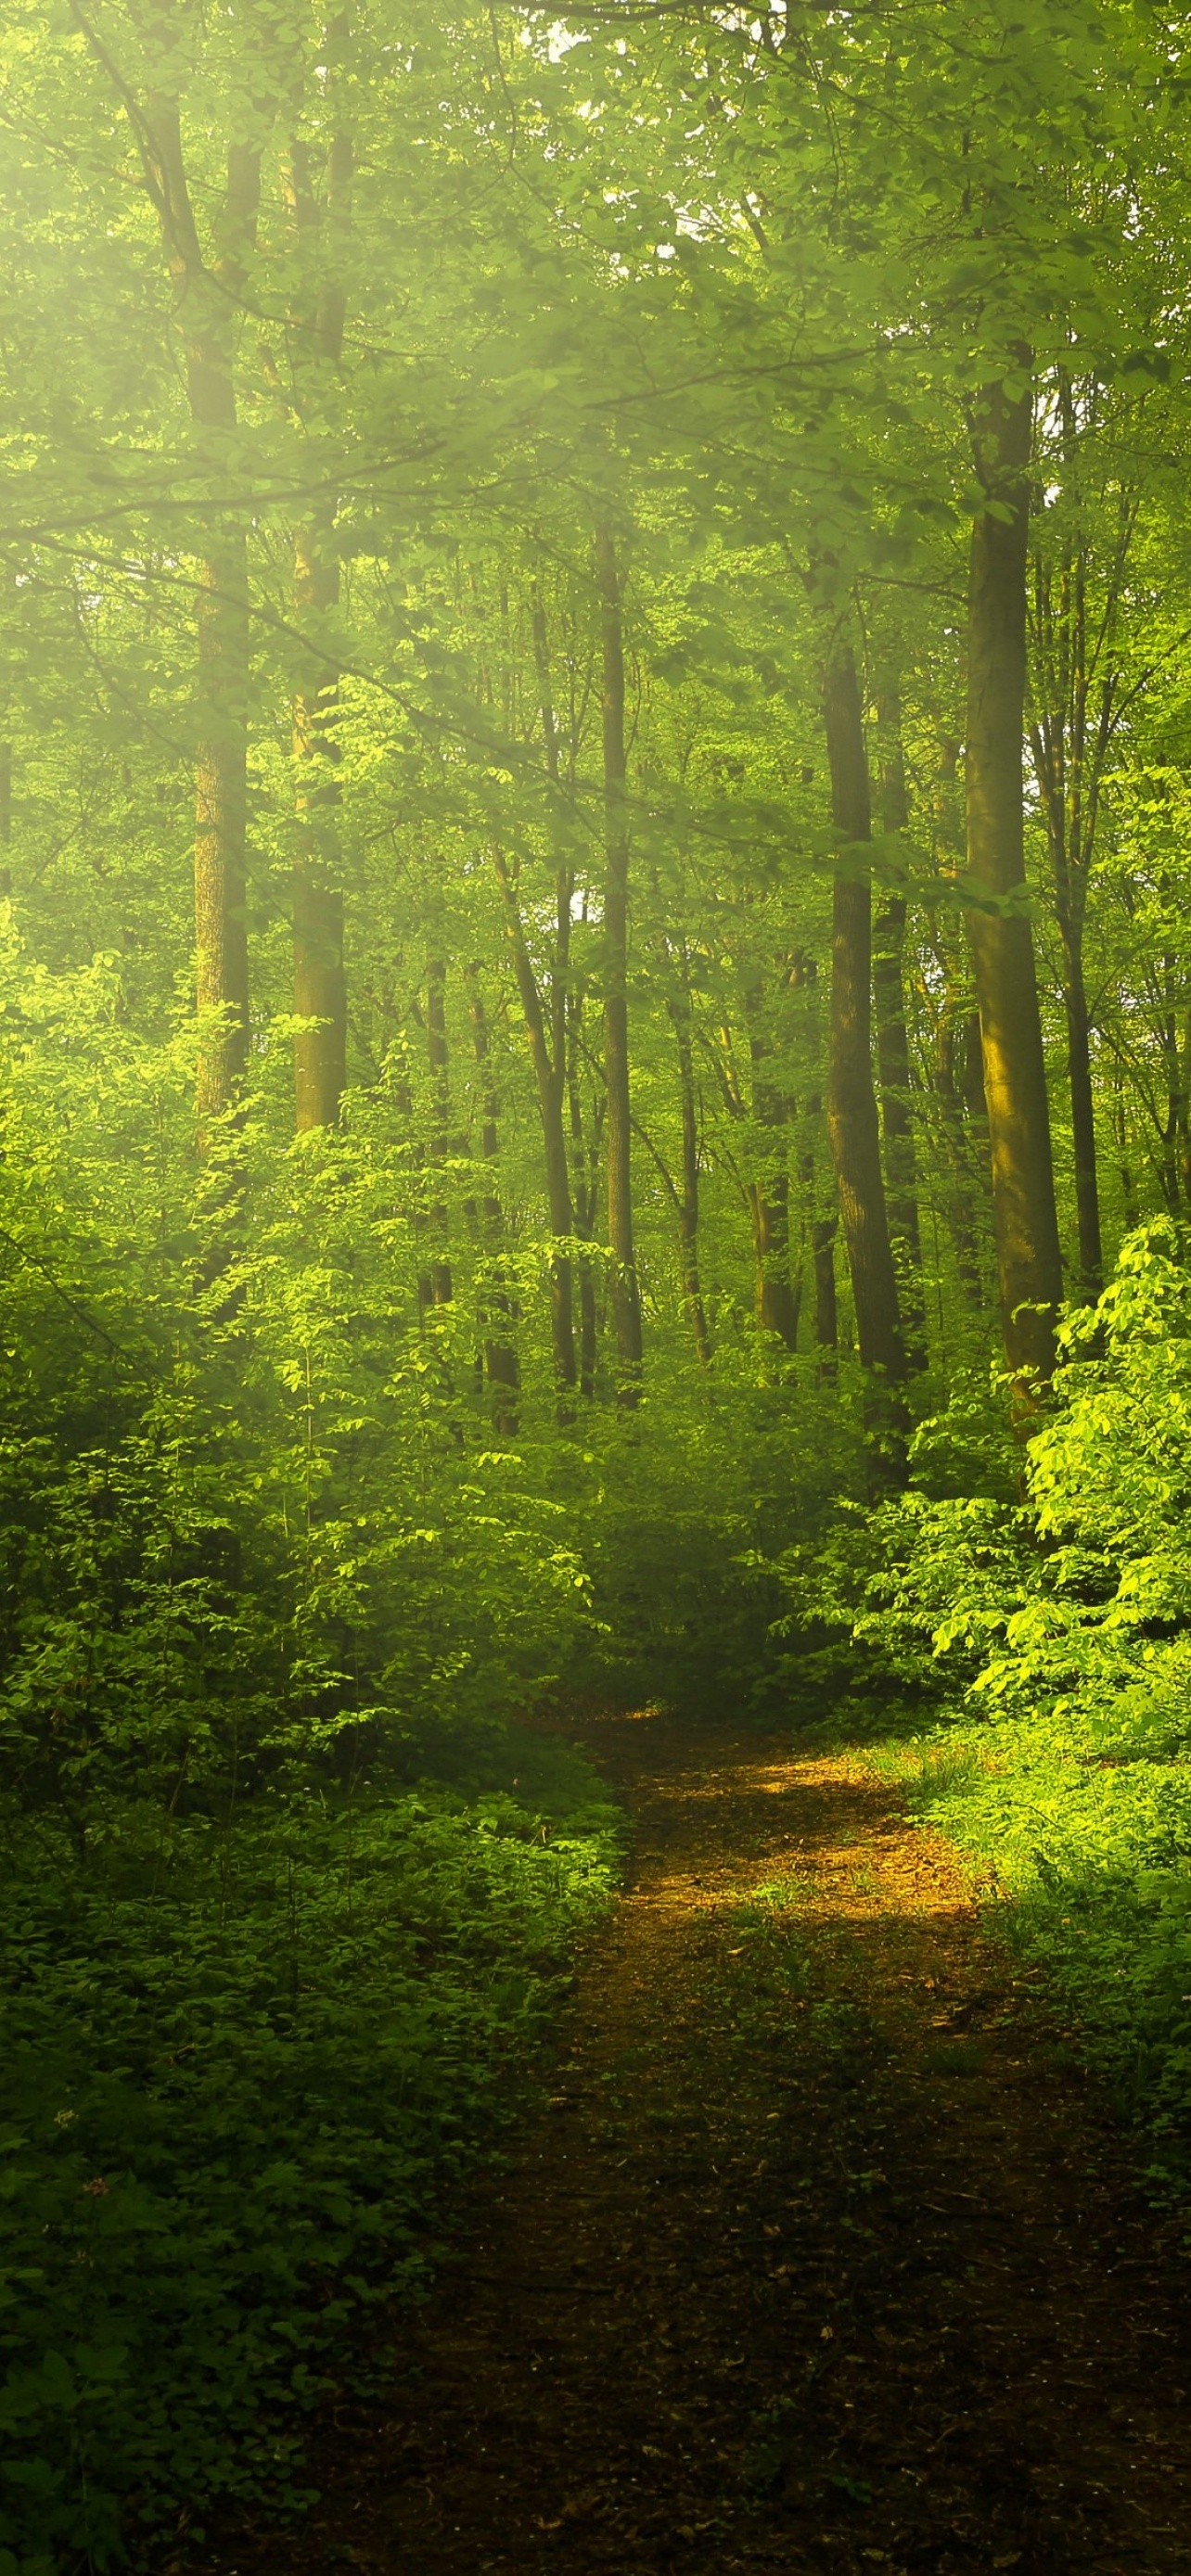 Green Forest Wallpaper 4K, Woods, Trails, Pathway, Nature, #5696